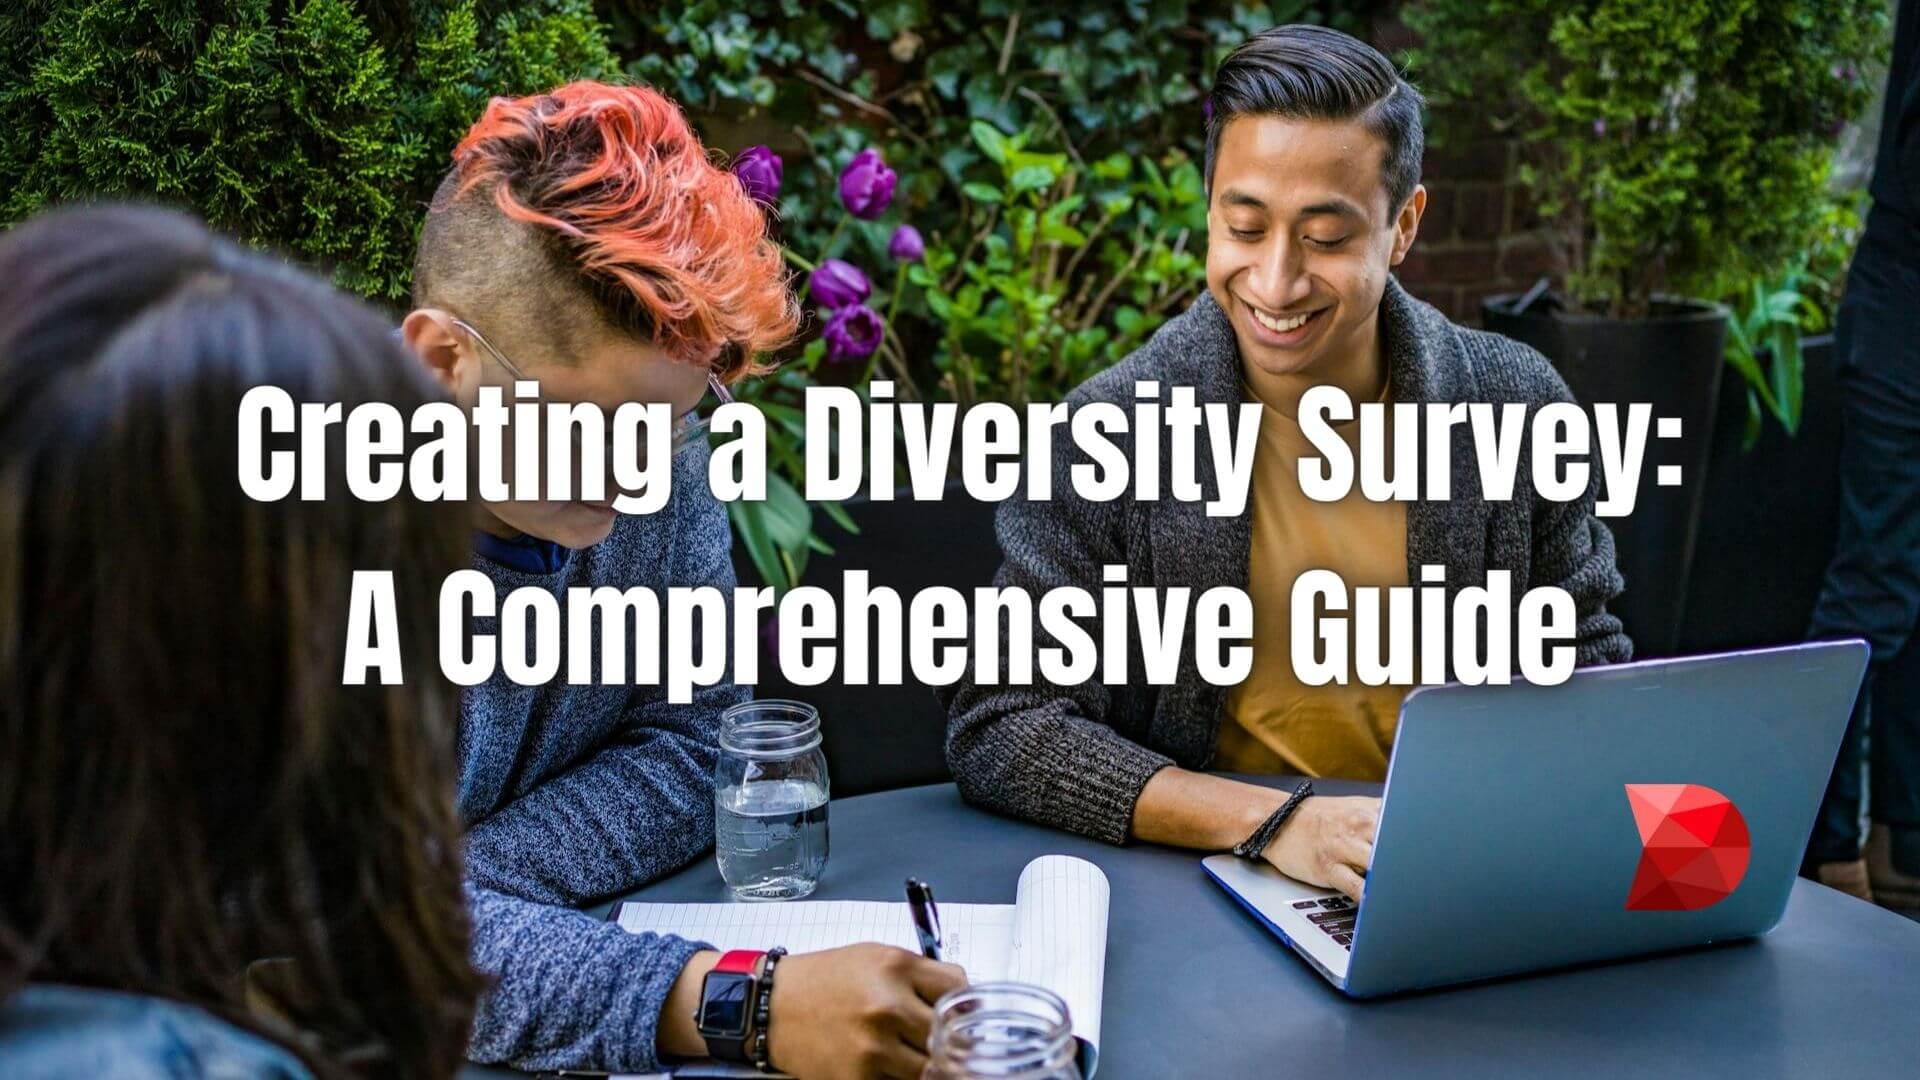 Create inclusive workplaces with our guide to creating a diversity survey. Learn how to gather valuable insights and drive meaningful change.